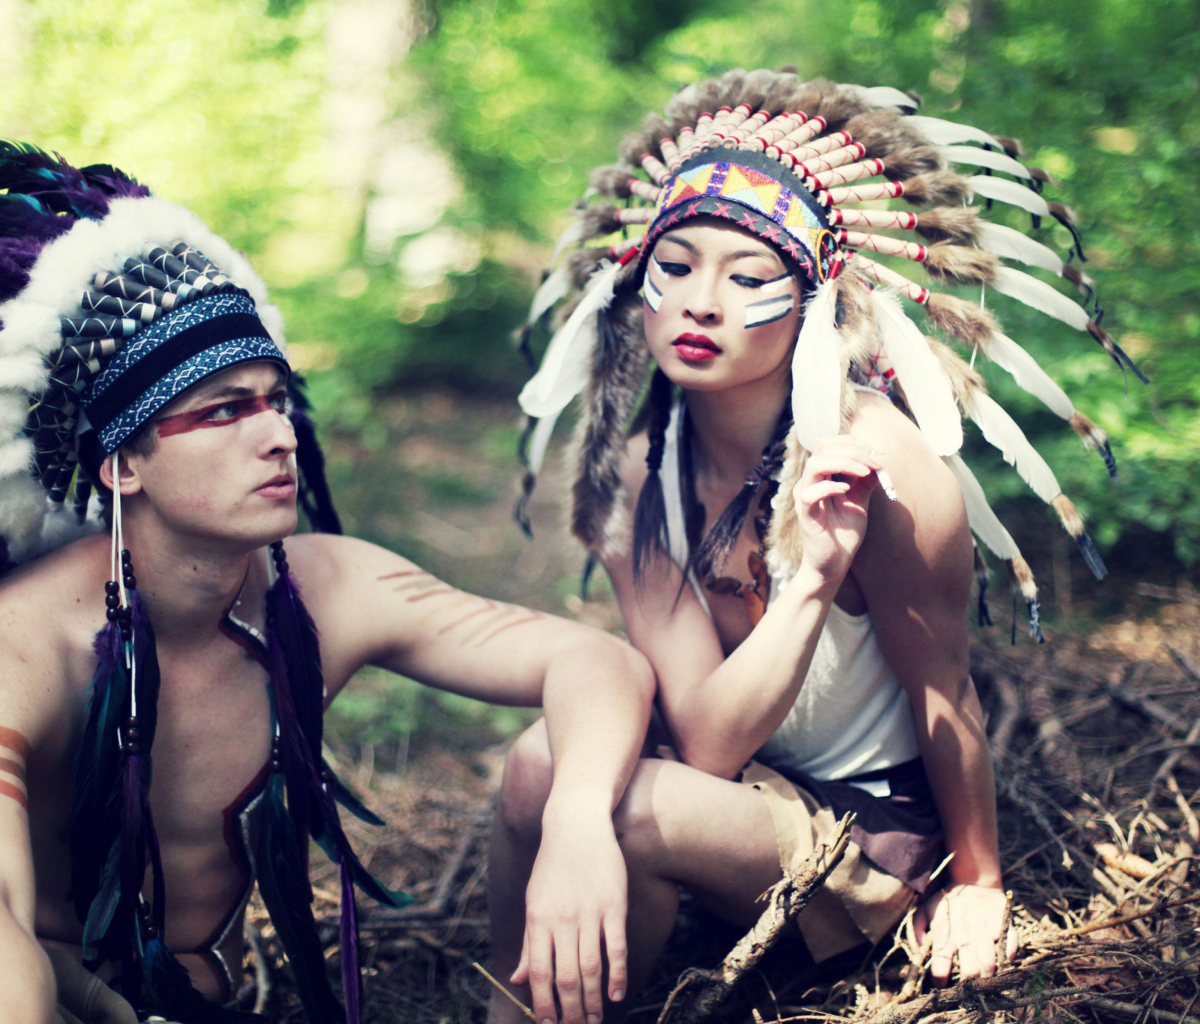 Indian Feather Hat wallpaper 1200x1024